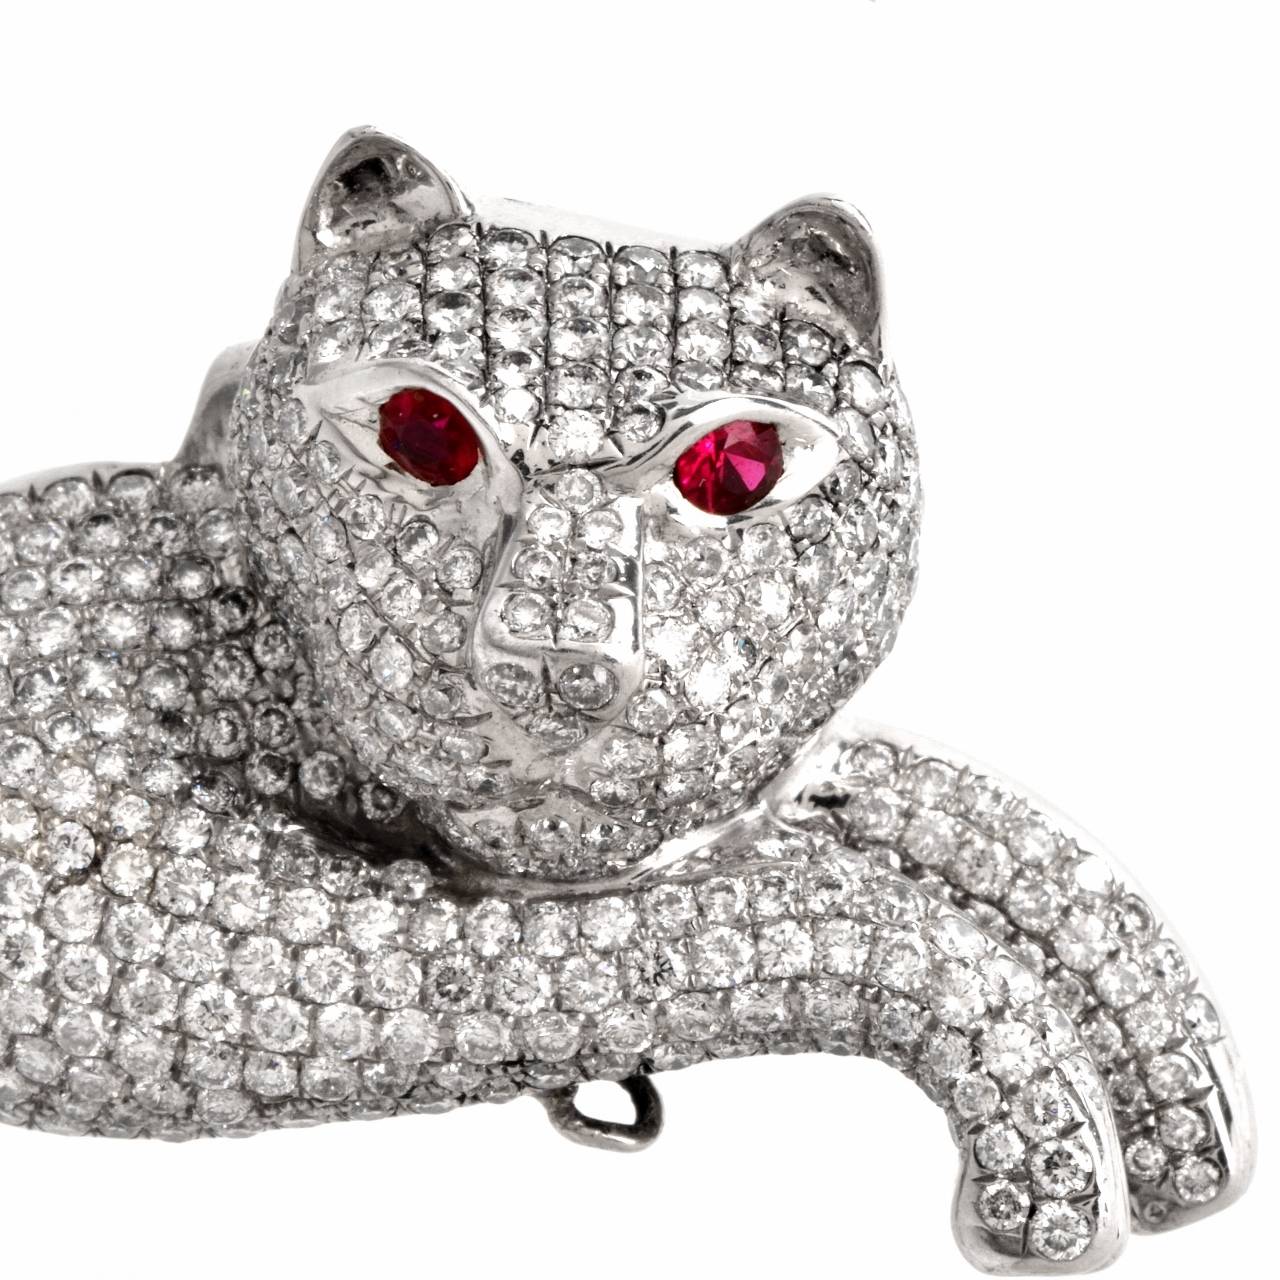 This captivating estate lapel brooch resplendent in  pave diamonds is crafted in solid 18K white gold, weighs approx. 40.1 grams and  measures 2.5